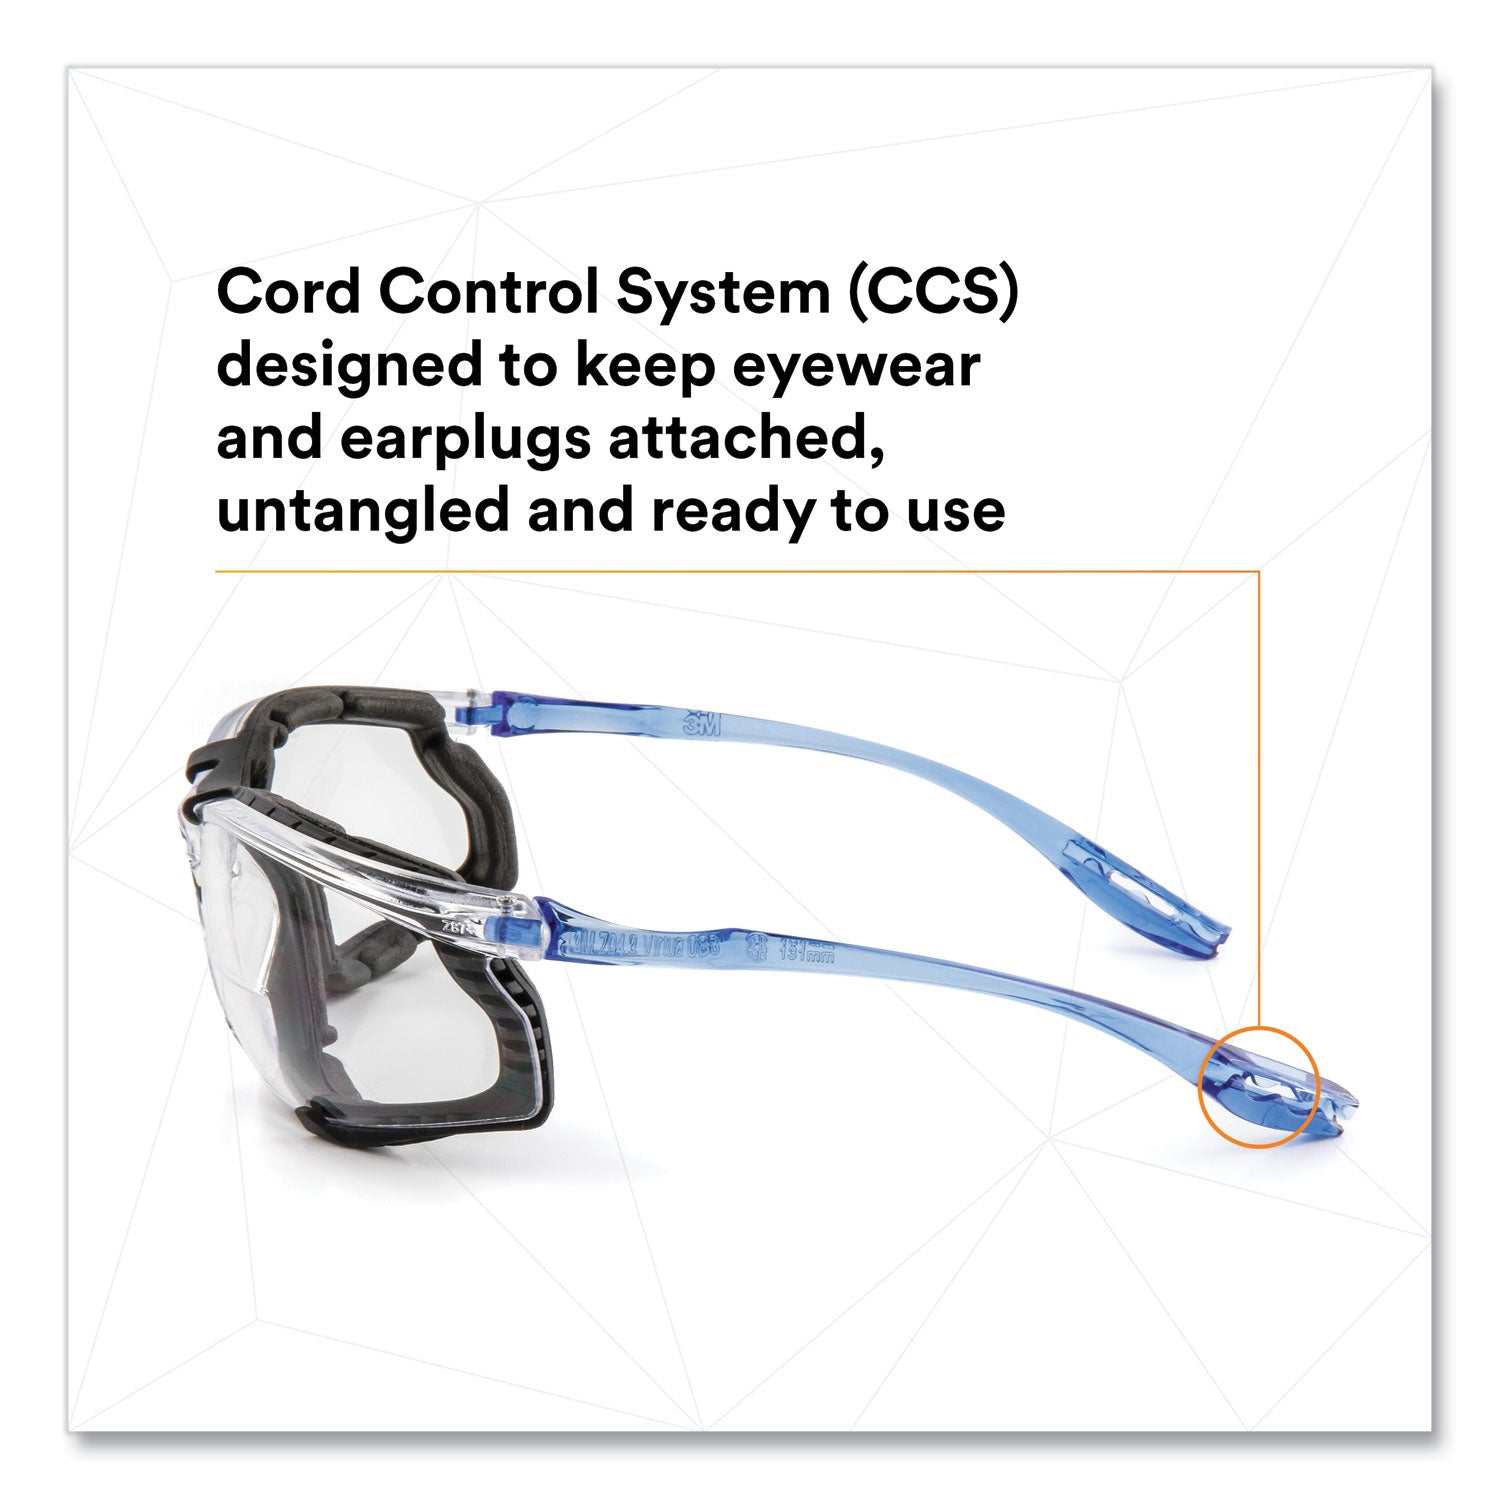 ccs-protective-eyewear-with-foam-gasket-+15-diopter-strength-blue-plastic-frame-clear-polycarbonate-lens_mmmvc215af - 5